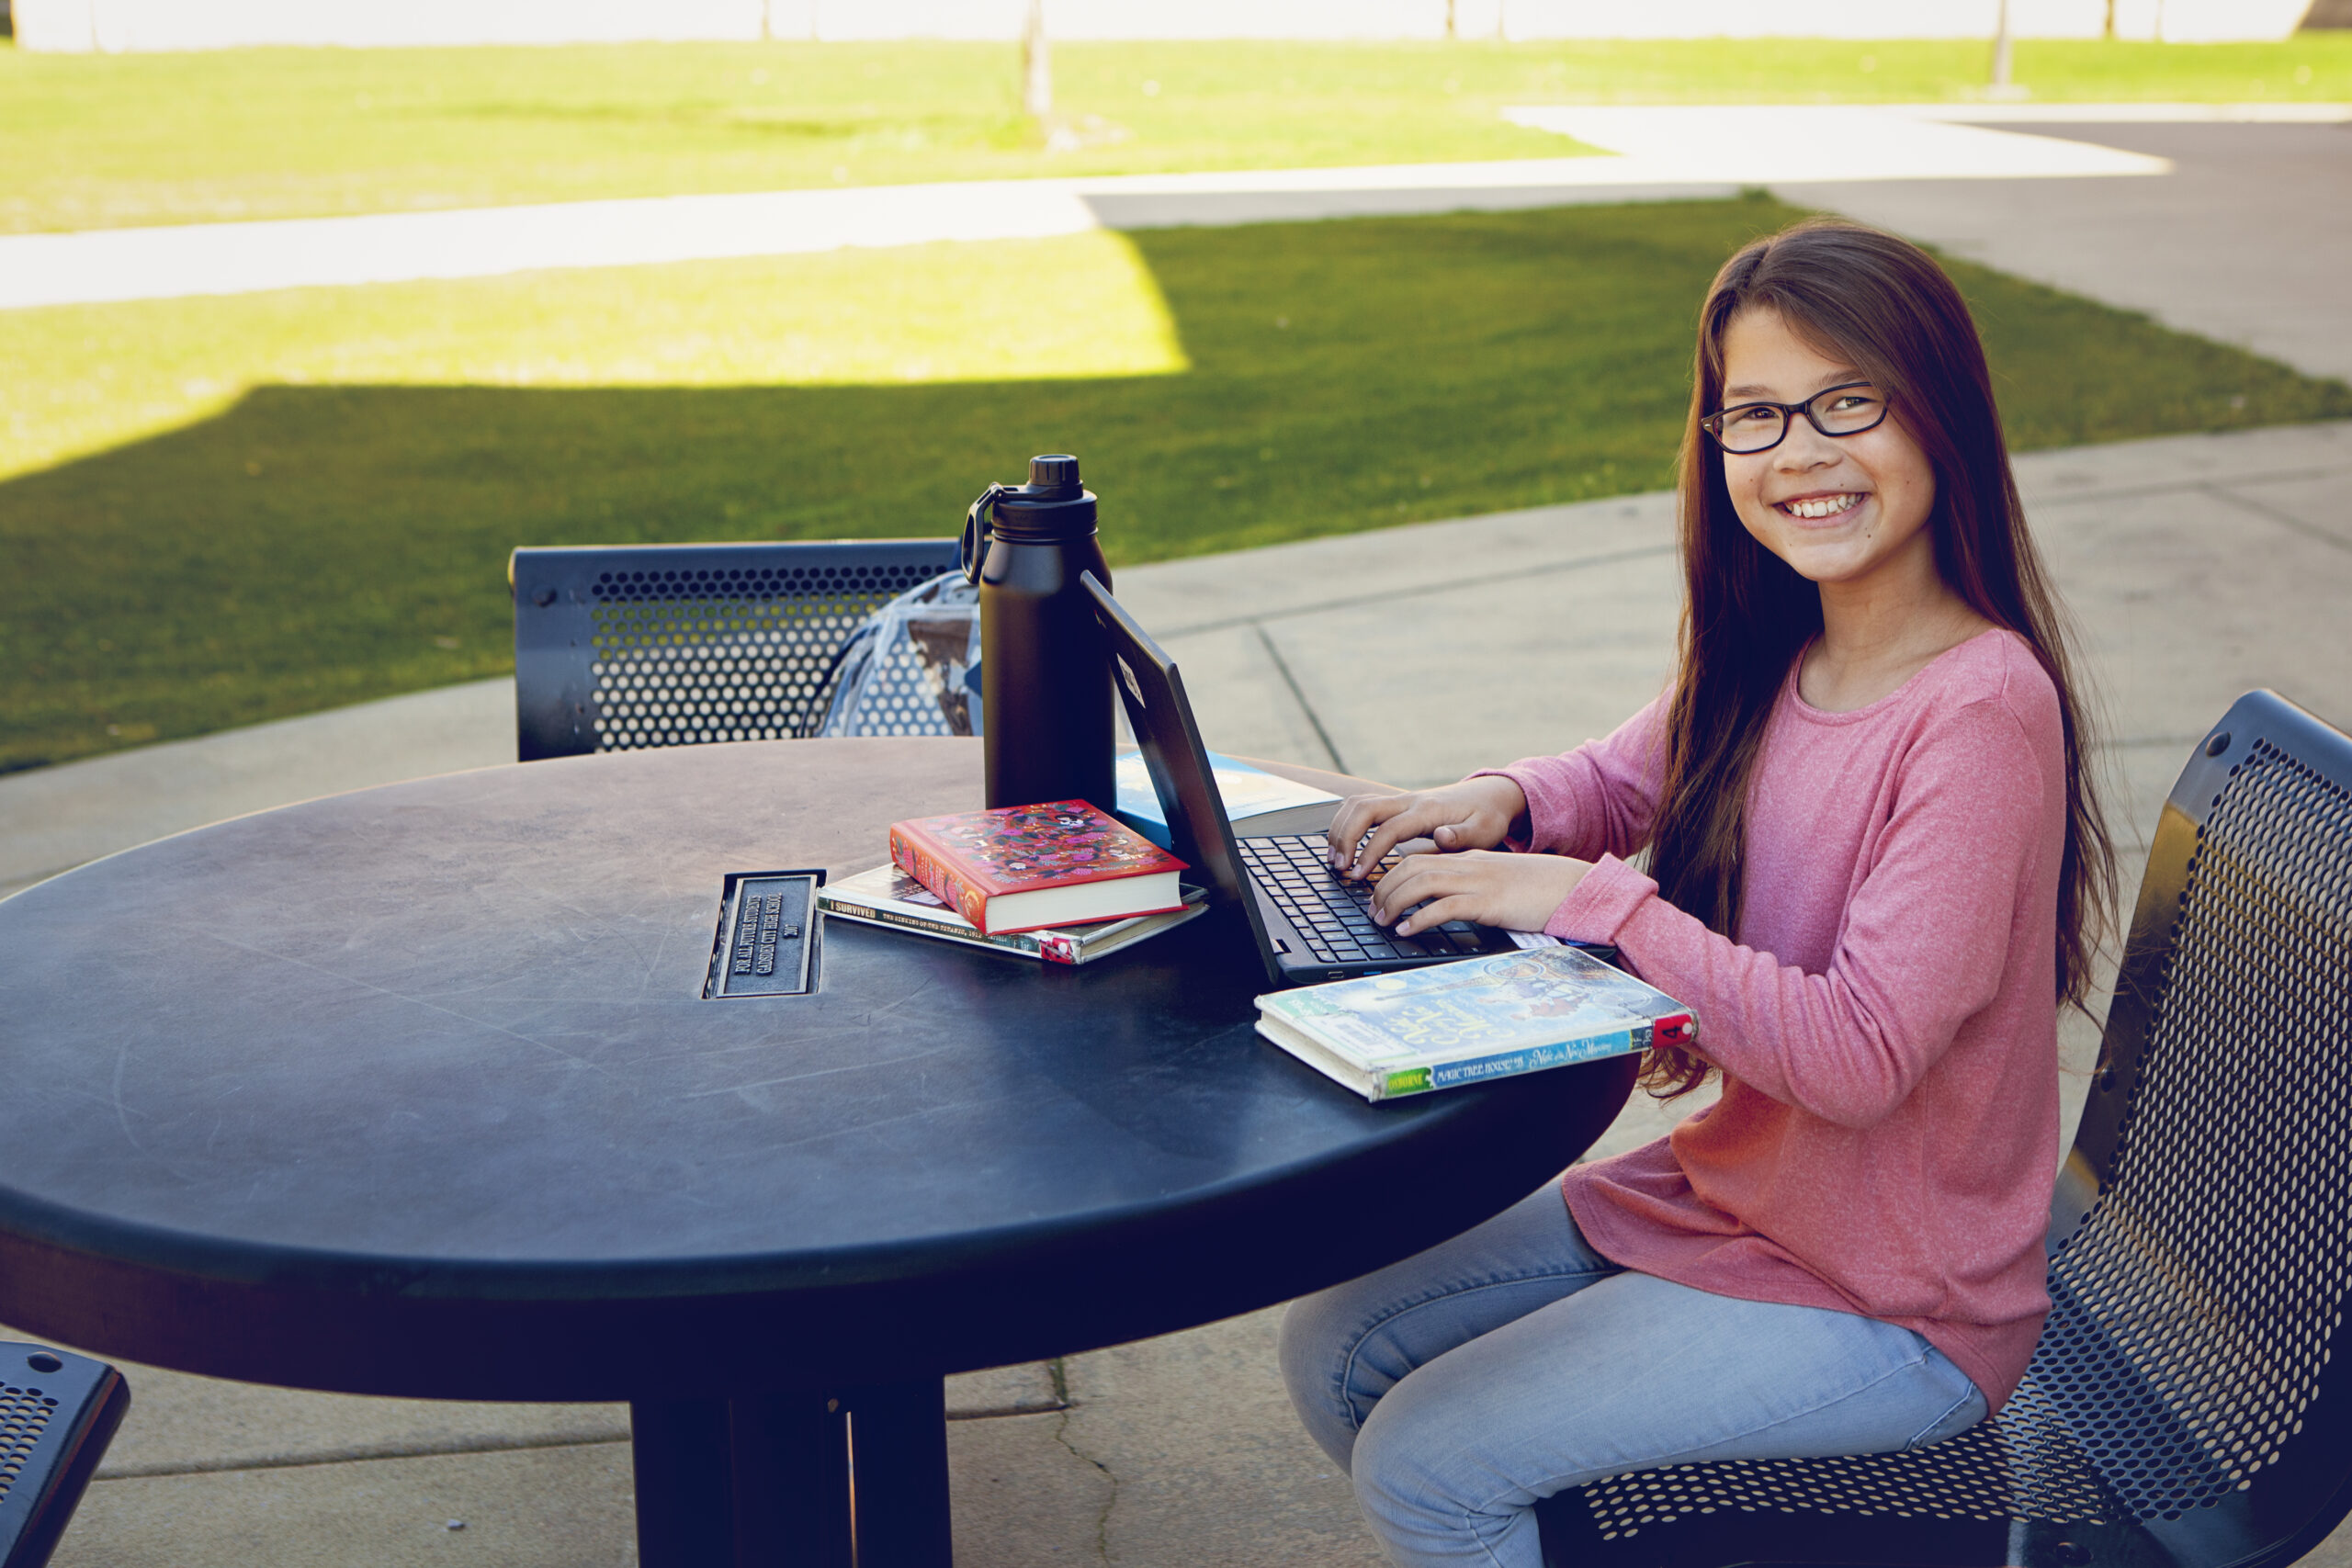 Outdoor Student at Table working on Laptop